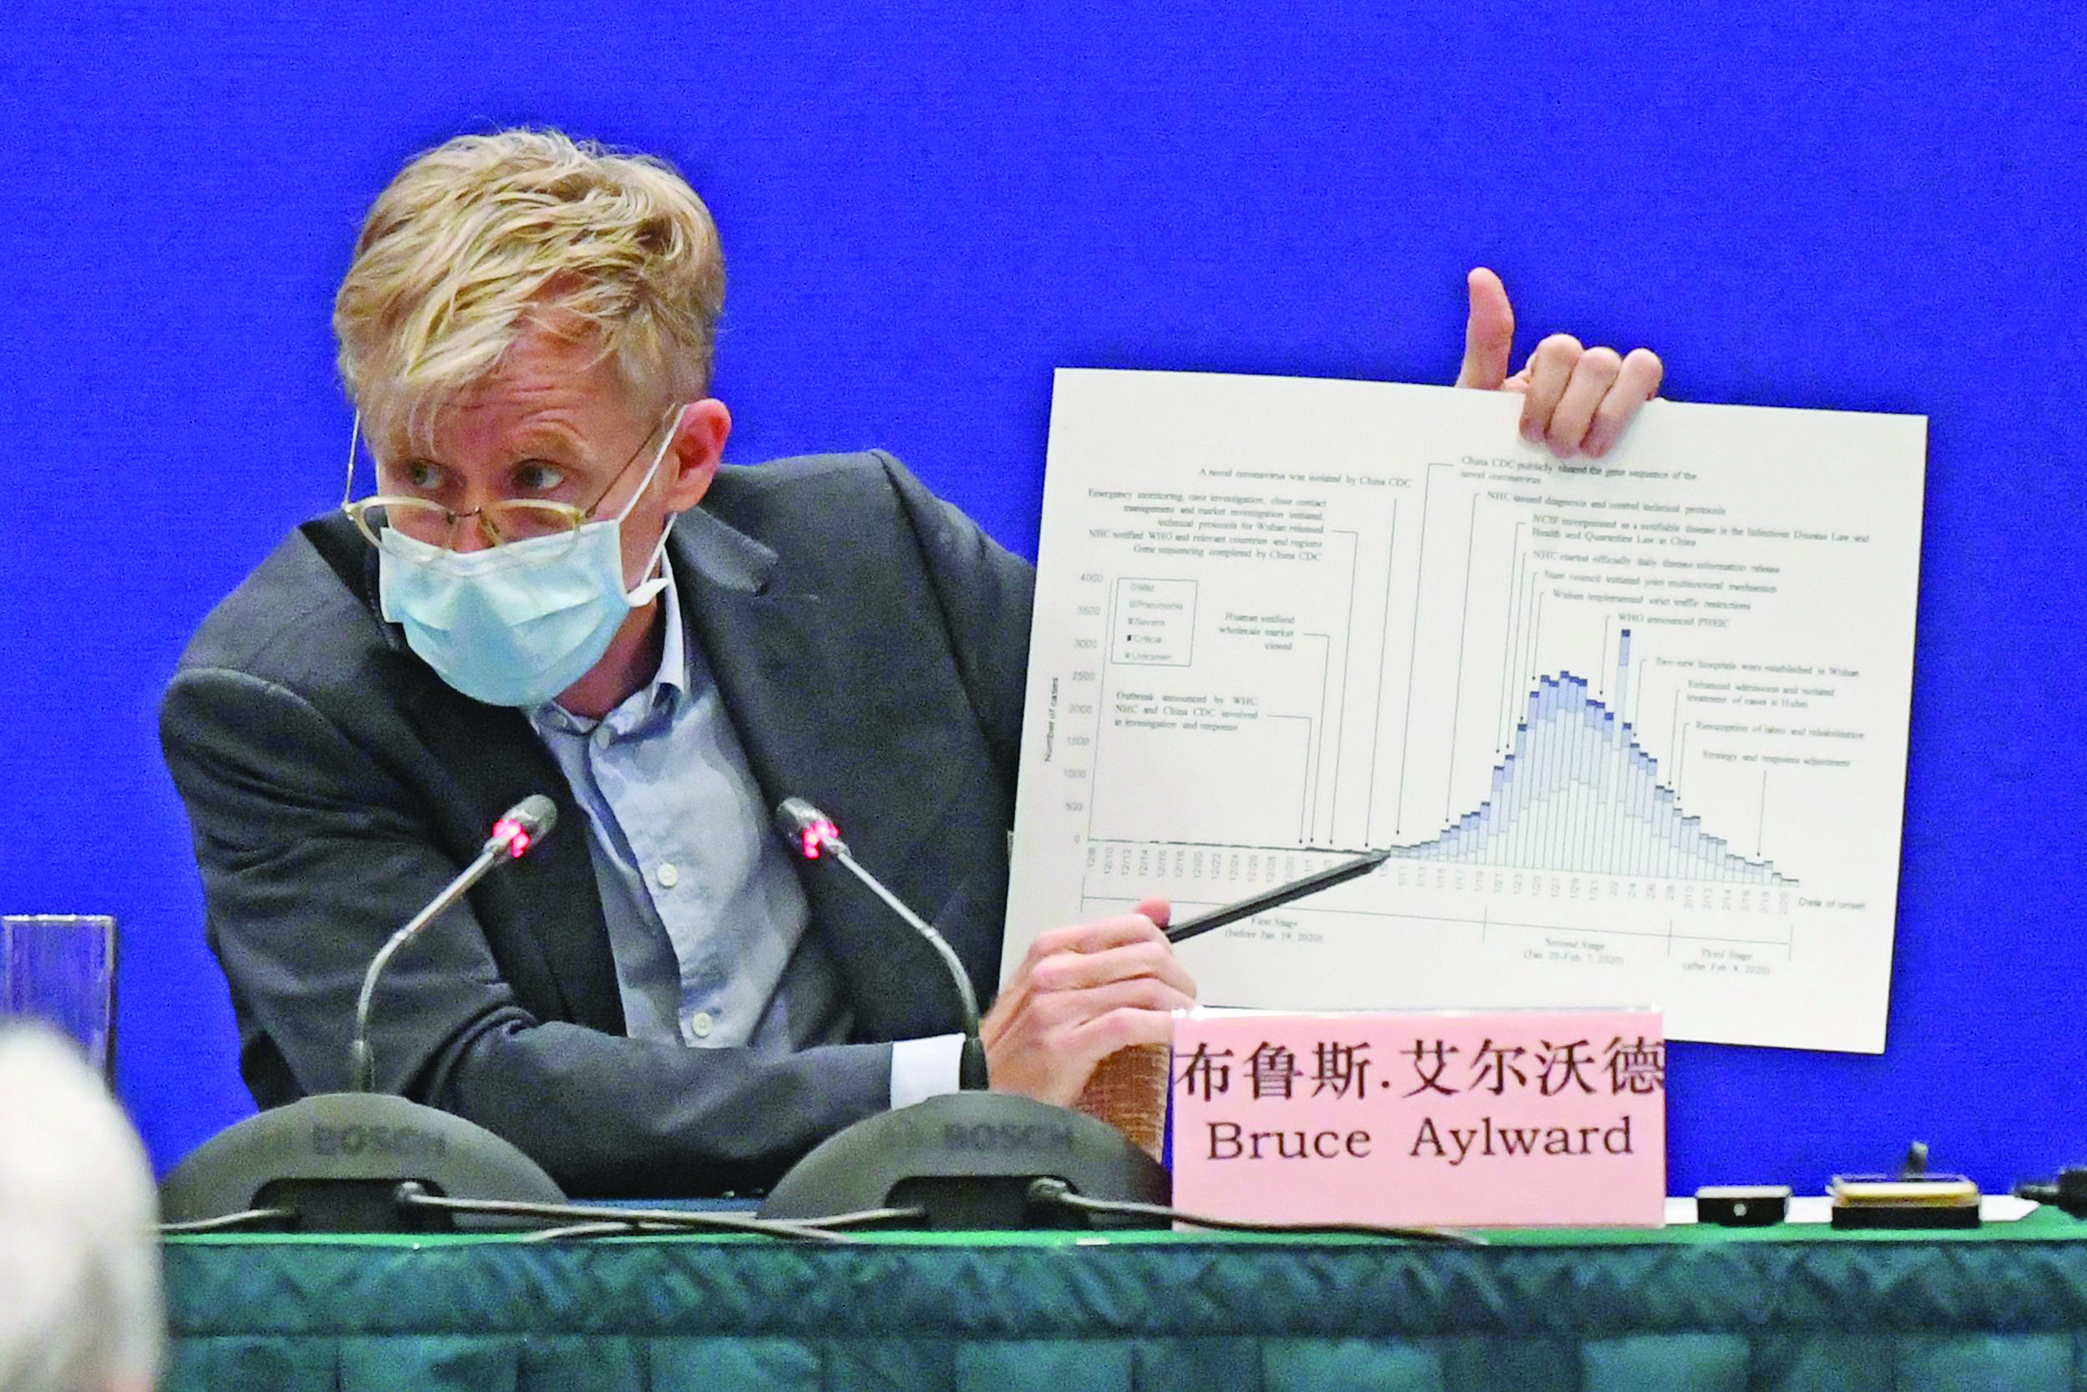 Bruce Aylward, head of the WHO-China Joint Mission on COVID-19 speaks at a press conference about the COVID-19 coronavirus outbreak, in Beijing on February 24, 2020. - The novel coronavirus has spread to more than 25 countries since it emerged in December and is causing mounting alarm due to new outbreaks in Europe, the Middle East and Asia. (Photo by MATTHEW KNIGHT / AFP)